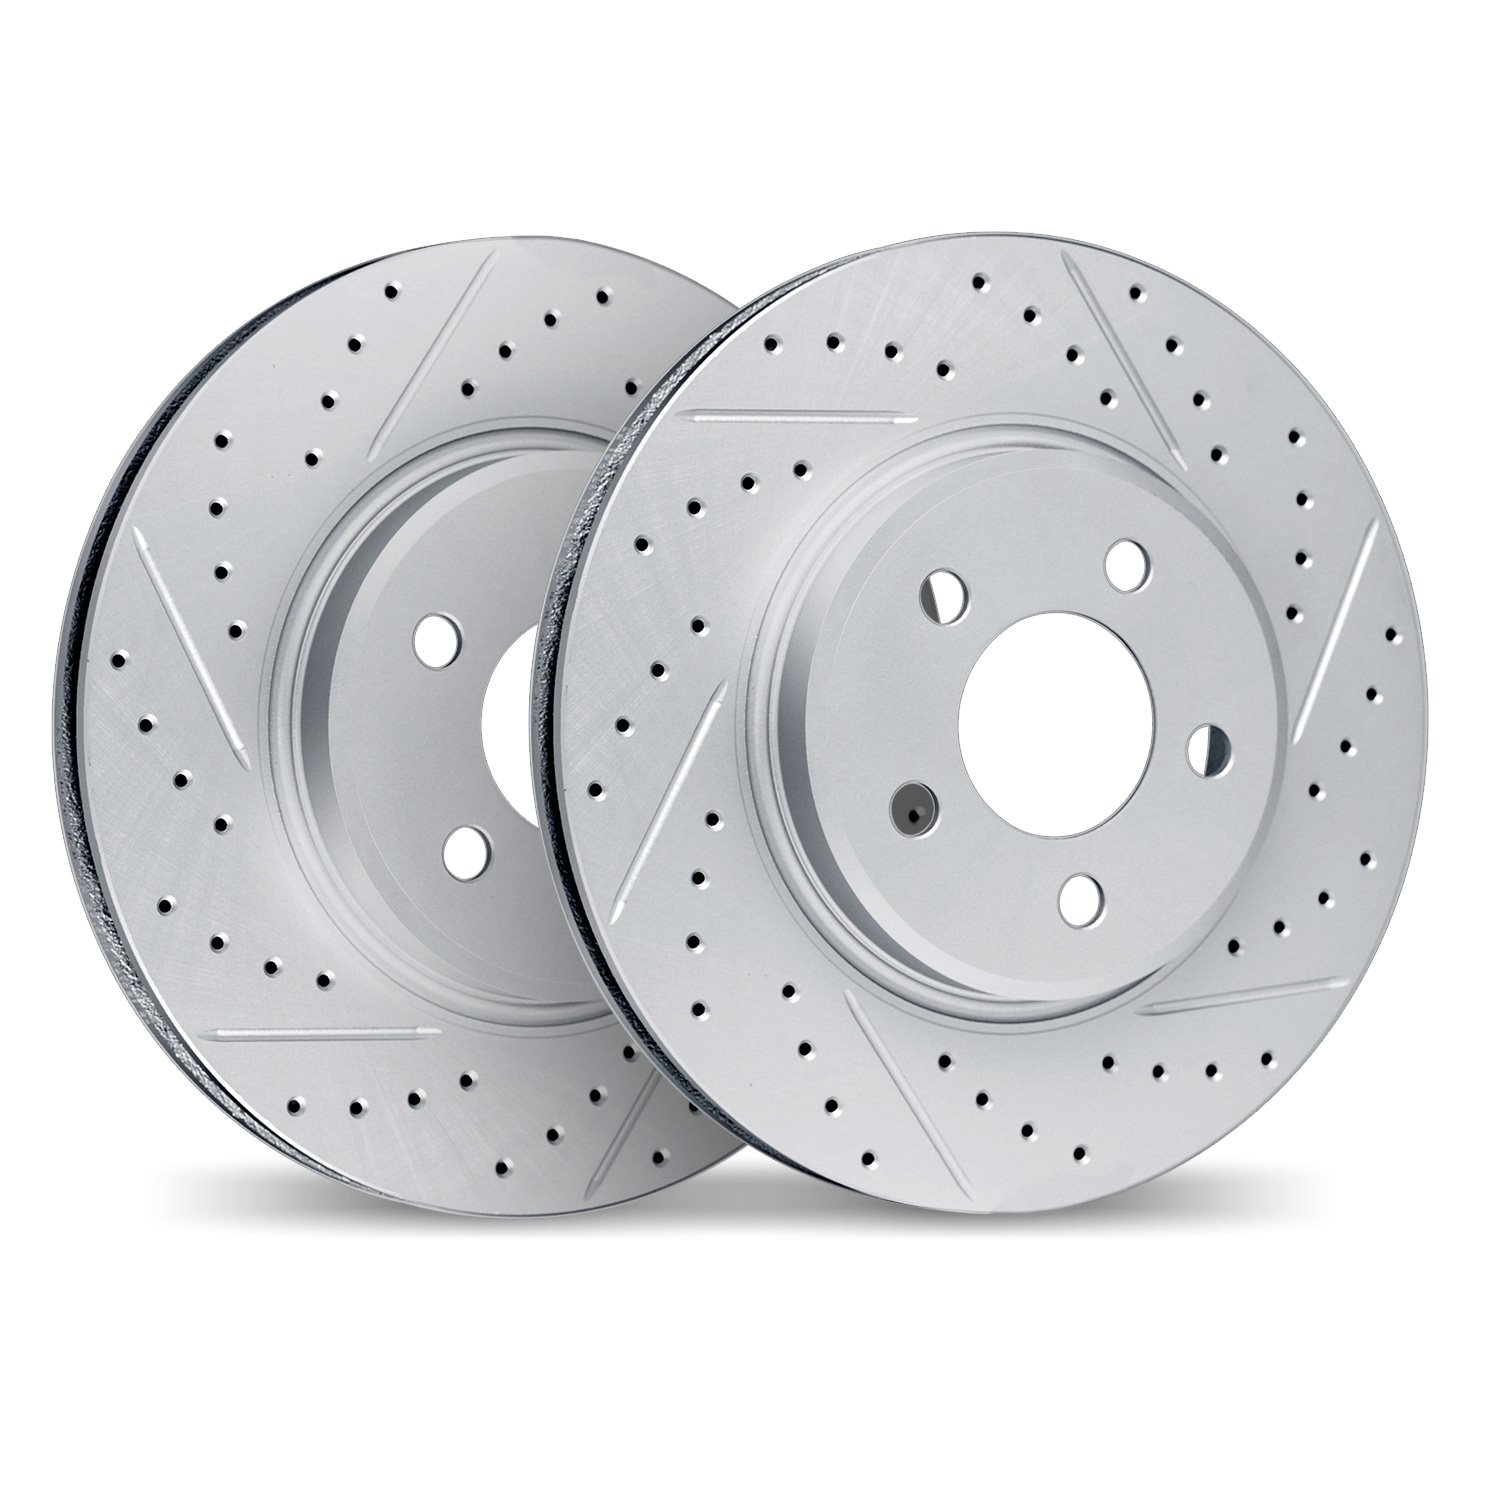 2002-67044 Geoperformance Drilled/Slotted Brake Rotors, Fits Select Infiniti/Nissan, Position: Rear